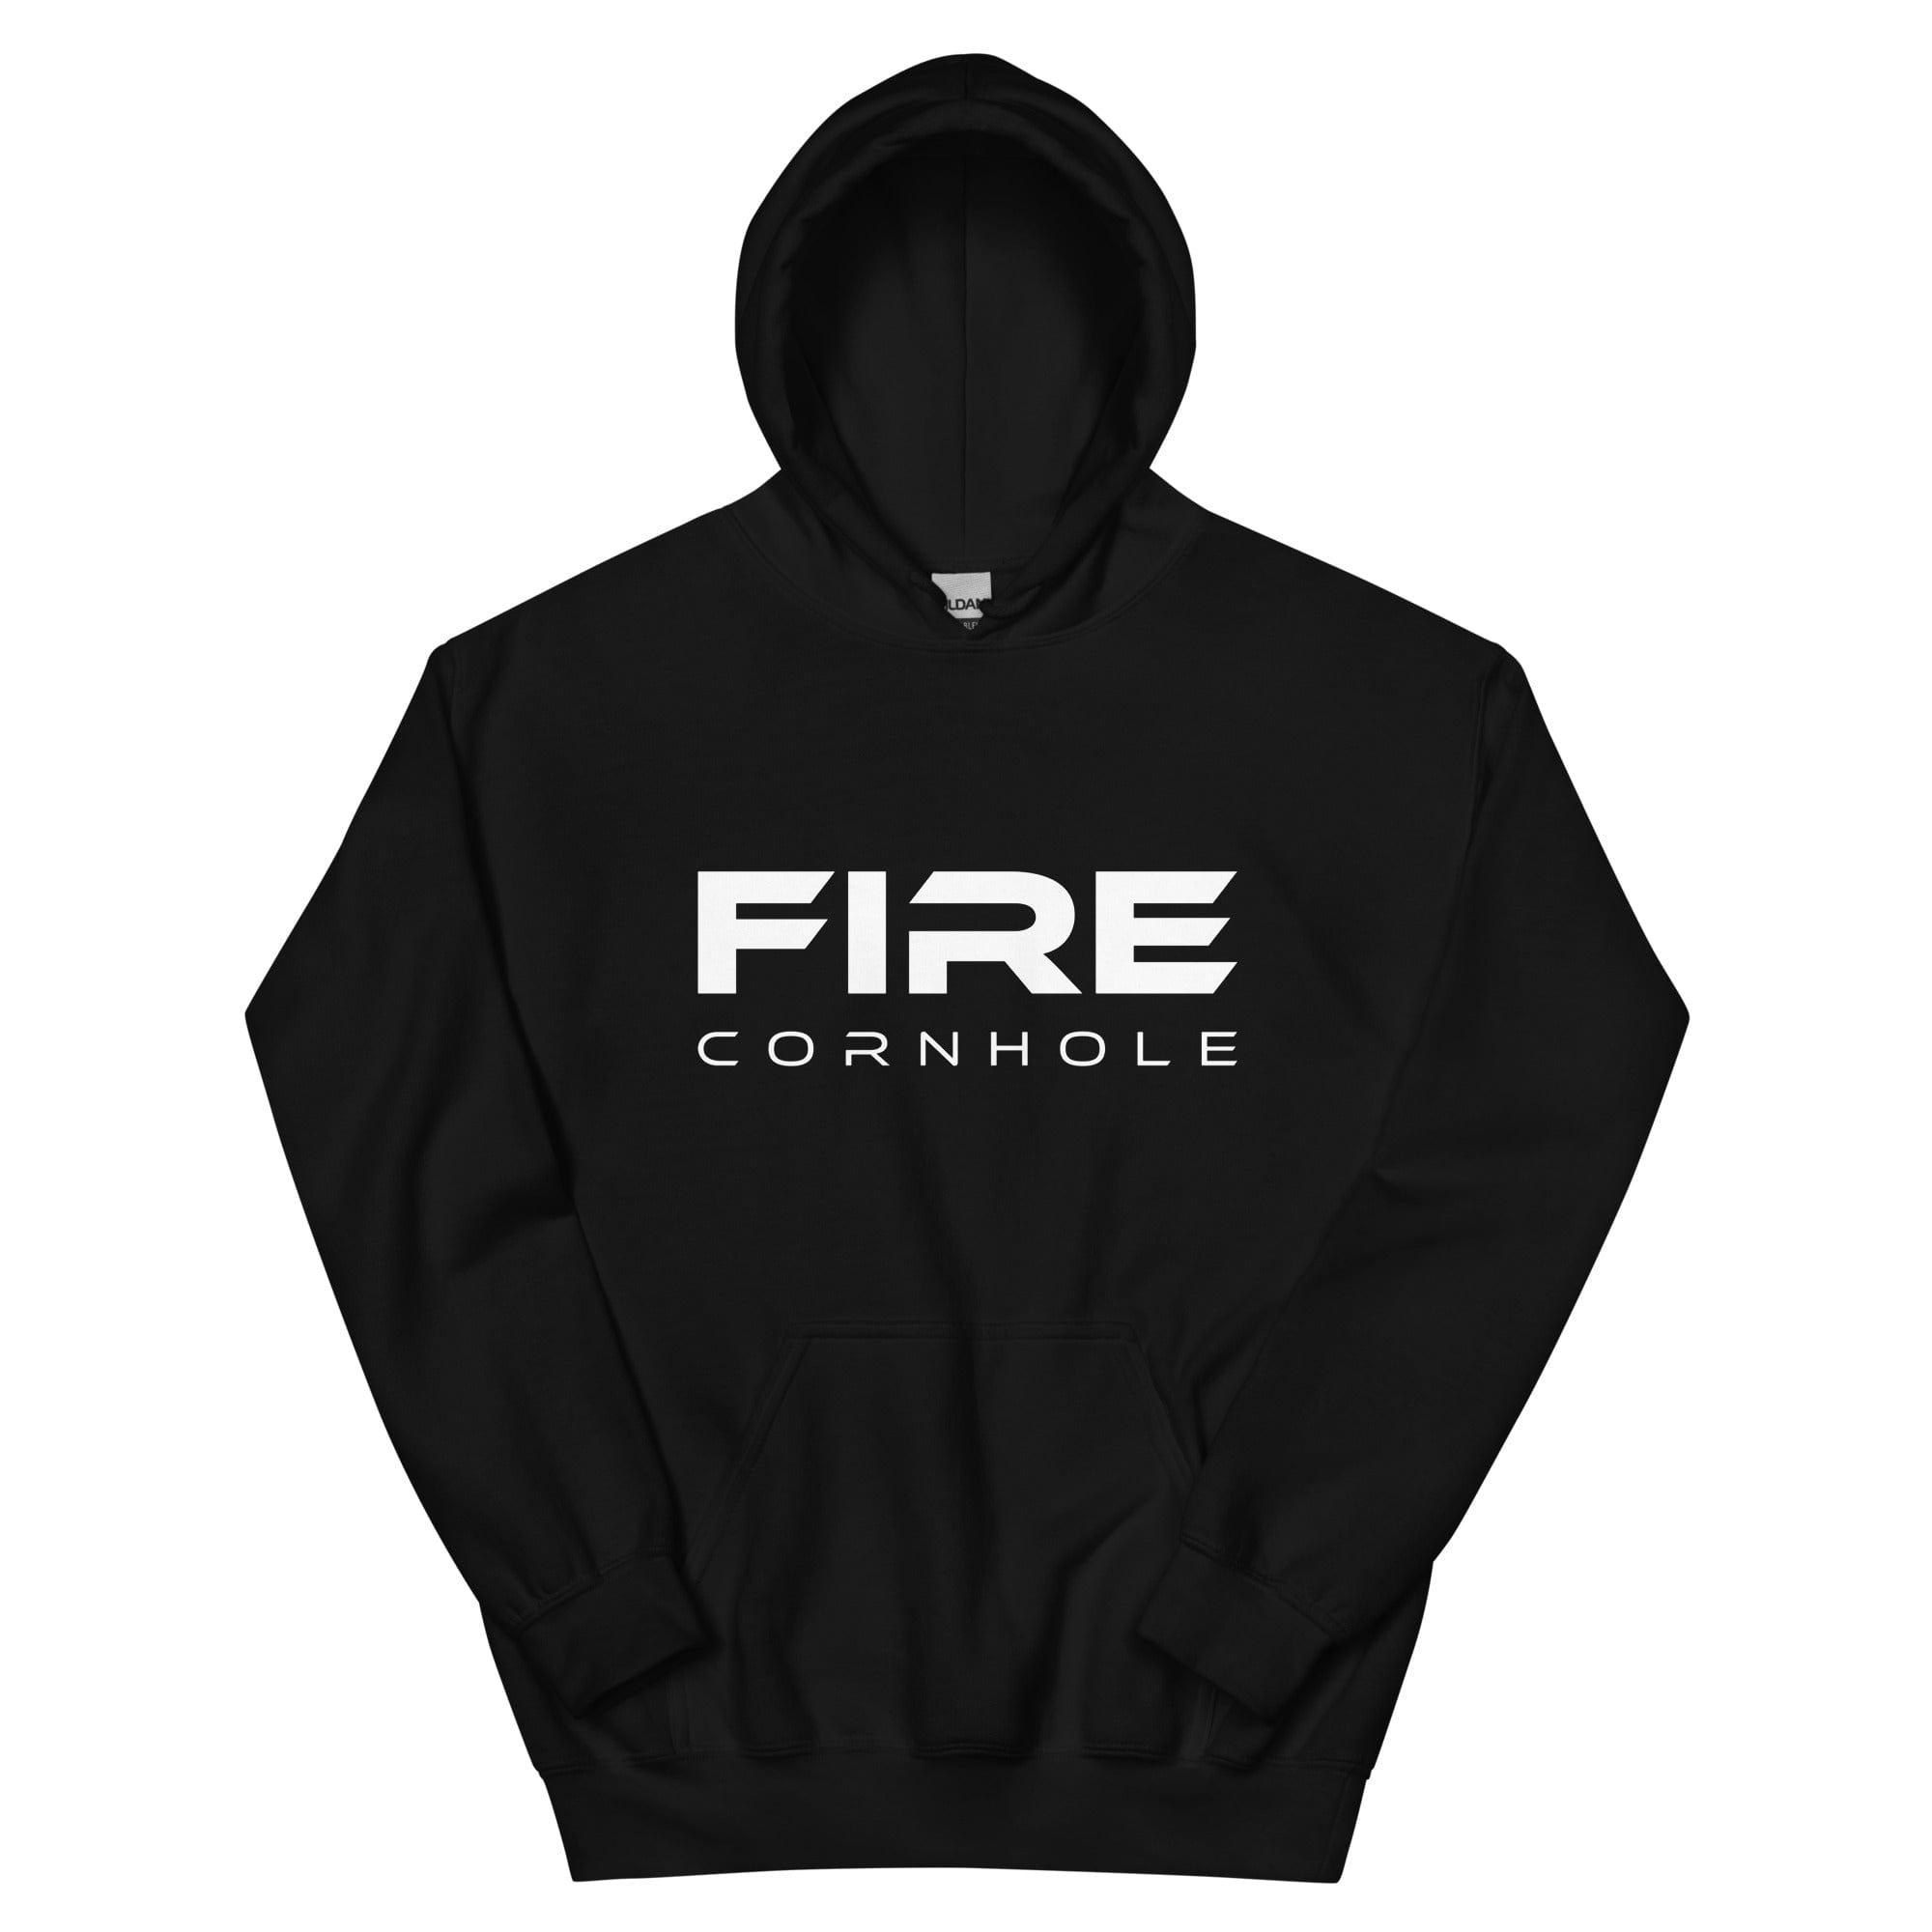 Black unisex cotton hoodie with Fire Cornhole logo in white